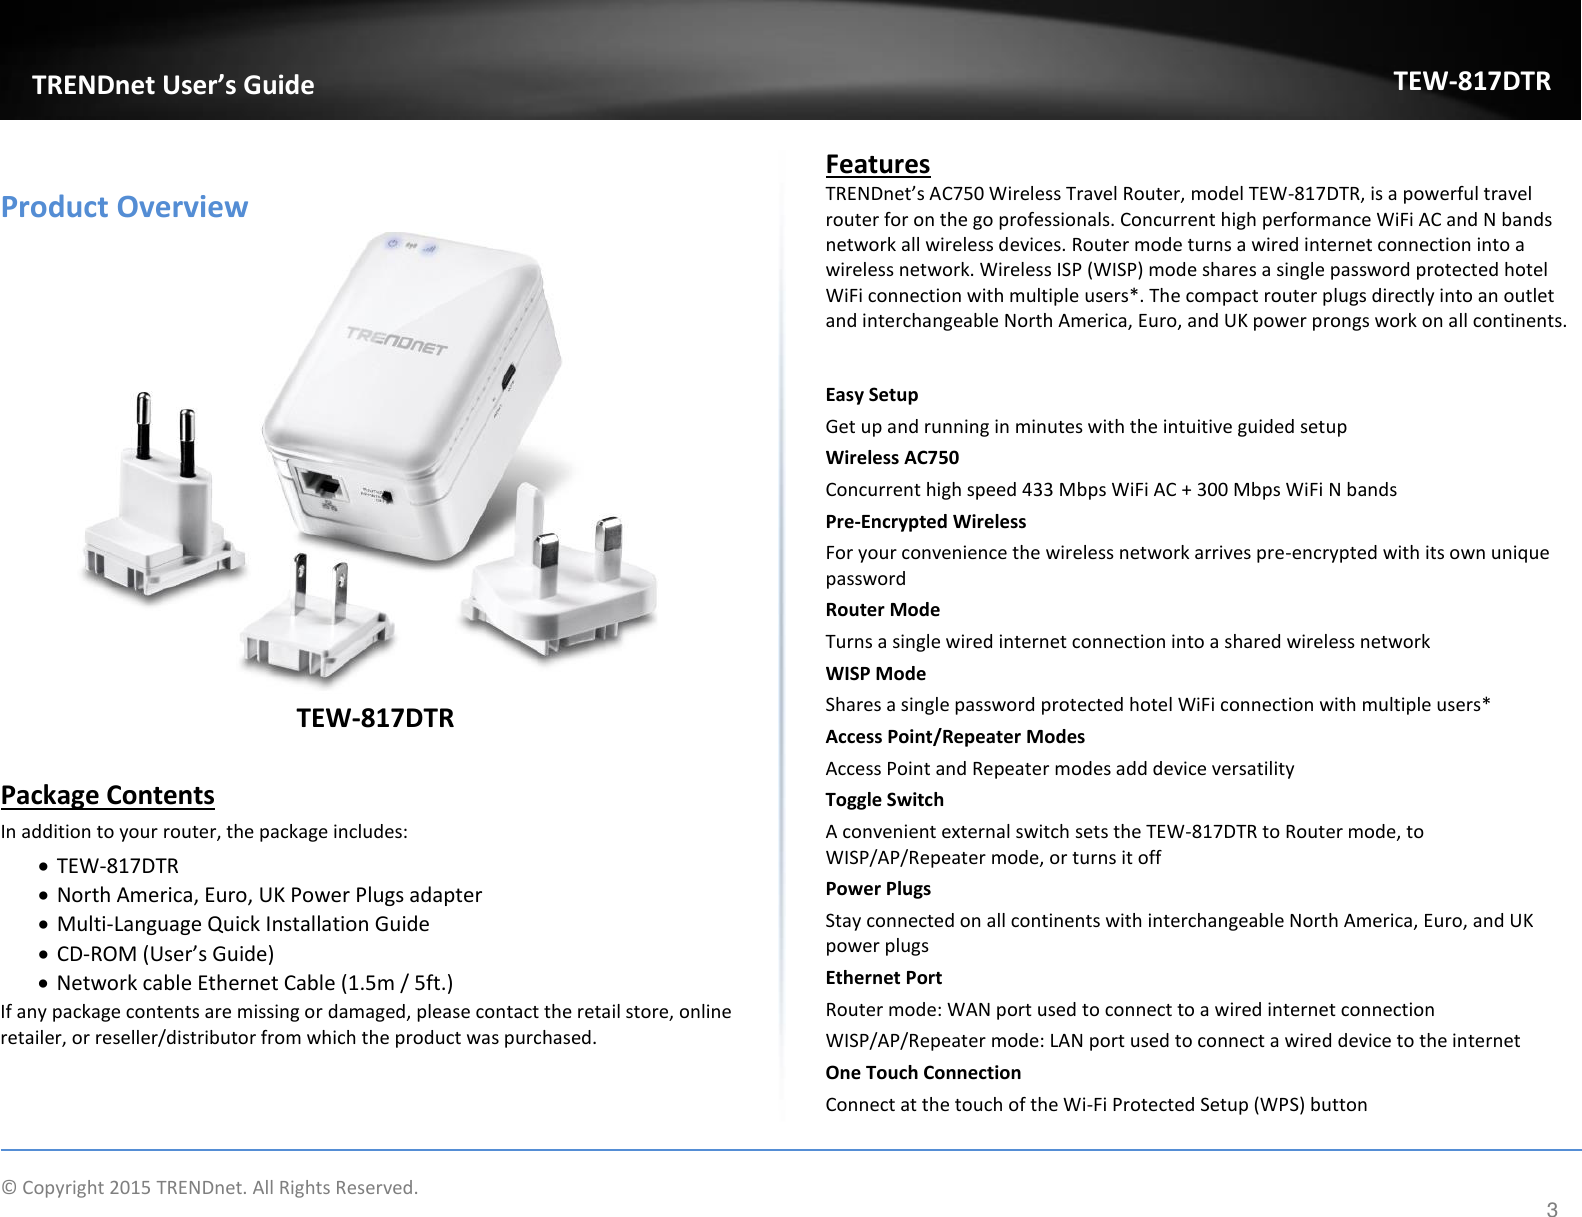             © Copyright 2015 TRENDnet. All Rights Reserved.       TRENDnet User’s Guide TEW-817DTR 3  Product Overview  TEW-817DTR  Package Contents In addition to your router, the package includes:  TEW-817DTR   North America, Euro, UK Power Plugs adapter  Multi-Language Quick Installation Guide  CD-ROM (User’s Guide)  Network cable Ethernet Cable (1.5m / 5ft.) If any package contents are missing or damaged, please contact the retail store, online retailer, or reseller/distributor from which the product was purchased.  Features  TRENDnet’s AC750 Wireless Travel Router, model TEW-817DTR, is a powerful travel router for on the go professionals. Concurrent high performance WiFi AC and N bands network all wireless devices. Router mode turns a wired internet connection into a wireless network. Wireless ISP (WISP) mode shares a single password protected hotel WiFi connection with multiple users*. The compact router plugs directly into an outlet and interchangeable North America, Euro, and UK power prongs work on all continents.   Easy Setup Get up and running in minutes with the intuitive guided setup Wireless AC750 Concurrent high speed 433 Mbps WiFi AC + 300 Mbps WiFi N bands Pre-Encrypted Wireless  For your convenience the wireless network arrives pre-encrypted with its own unique password Router Mode Turns a single wired internet connection into a shared wireless network WISP Mode  Shares a single password protected hotel WiFi connection with multiple users* Access Point/Repeater Modes Access Point and Repeater modes add device versatility Toggle Switch A convenient external switch sets the TEW-817DTR to Router mode, to WISP/AP/Repeater mode, or turns it off  Power Plugs  Stay connected on all continents with interchangeable North America, Euro, and UK power plugs Ethernet Port  Router mode: WAN port used to connect to a wired internet connection WISP/AP/Repeater mode: LAN port used to connect a wired device to the internet One Touch Connection Connect at the touch of the Wi-Fi Protected Setup (WPS) button 